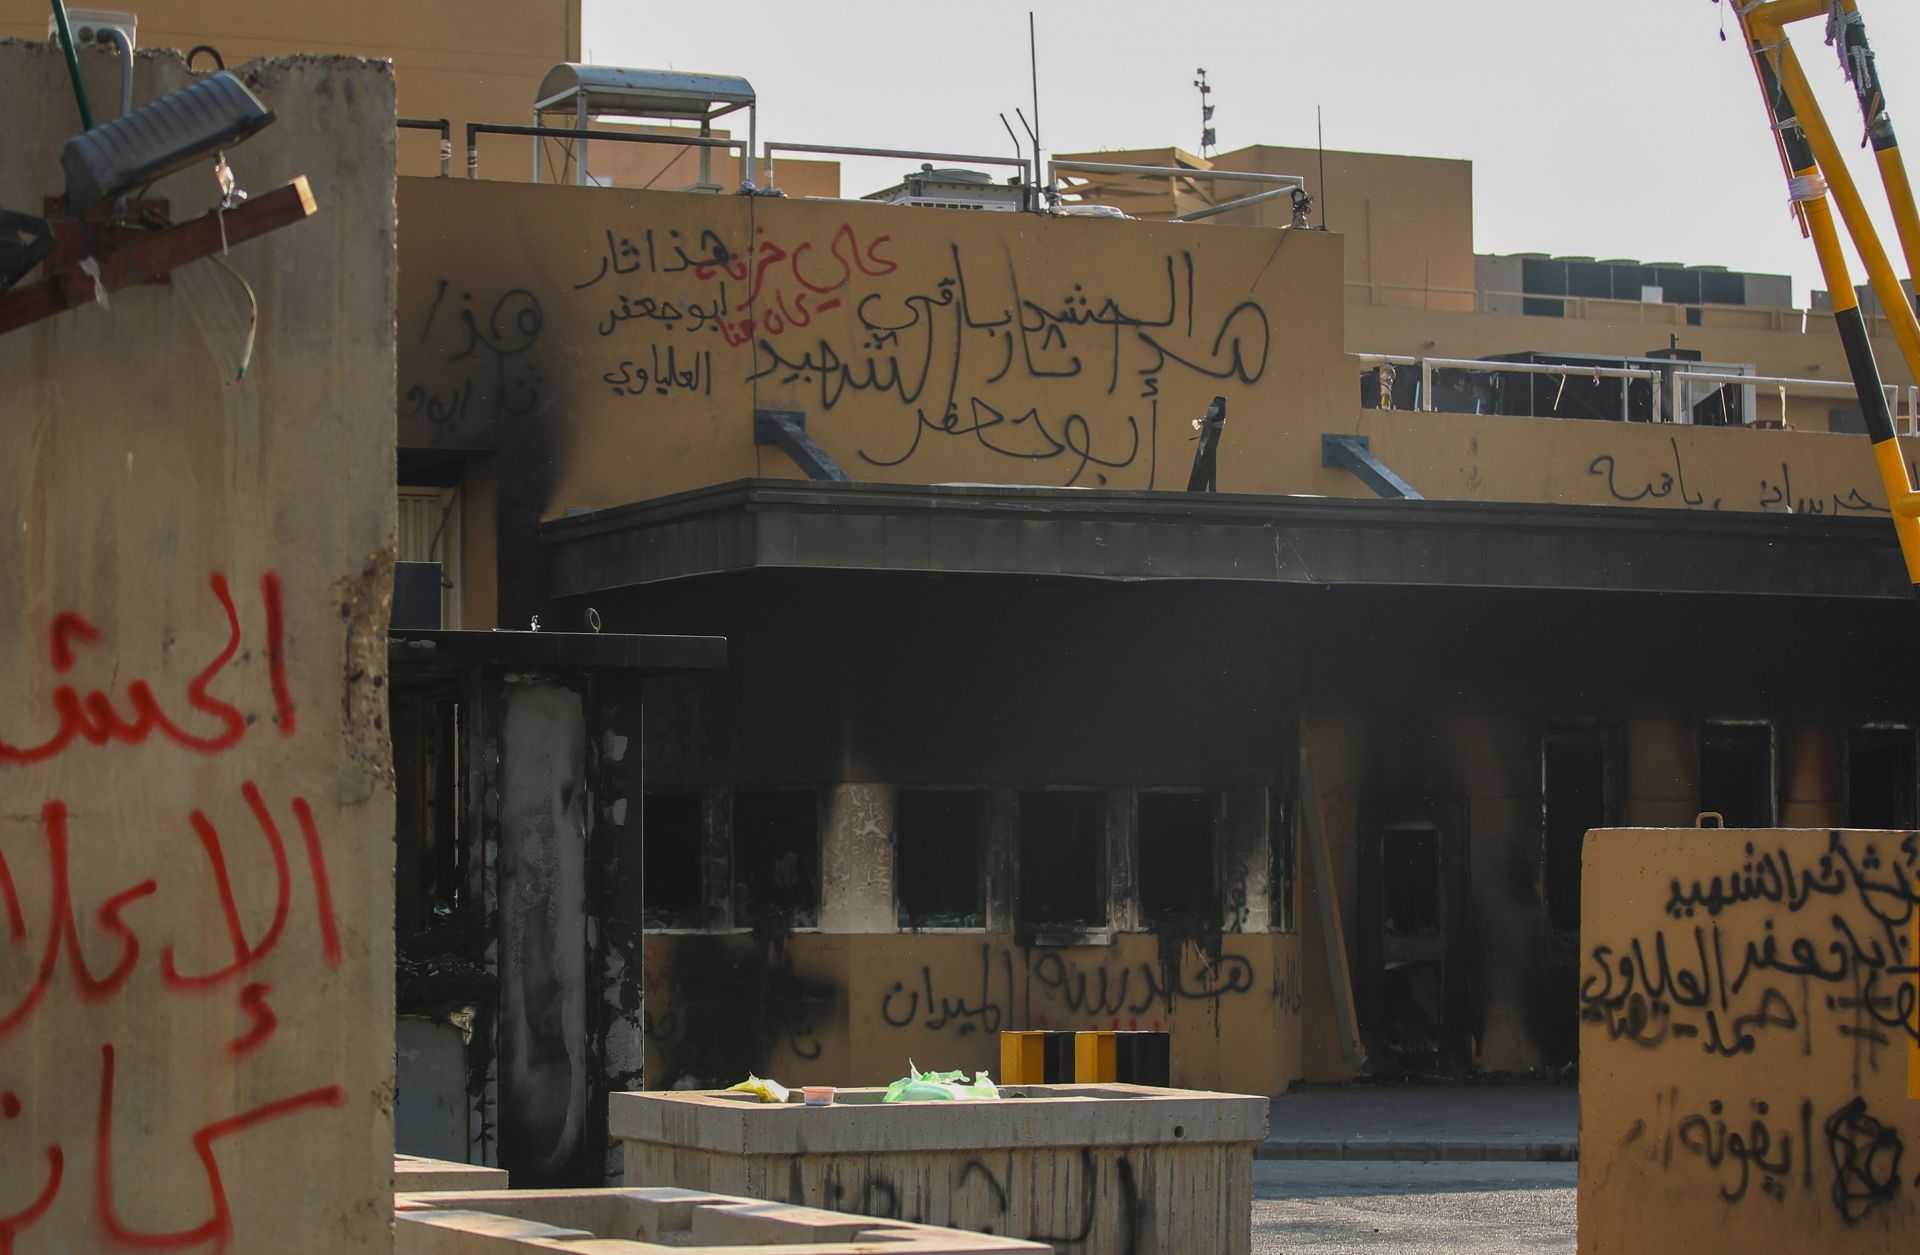 The U.S. Embassy in Baghdad is seen on Jan. 2, 2020, following an attack on the facility.